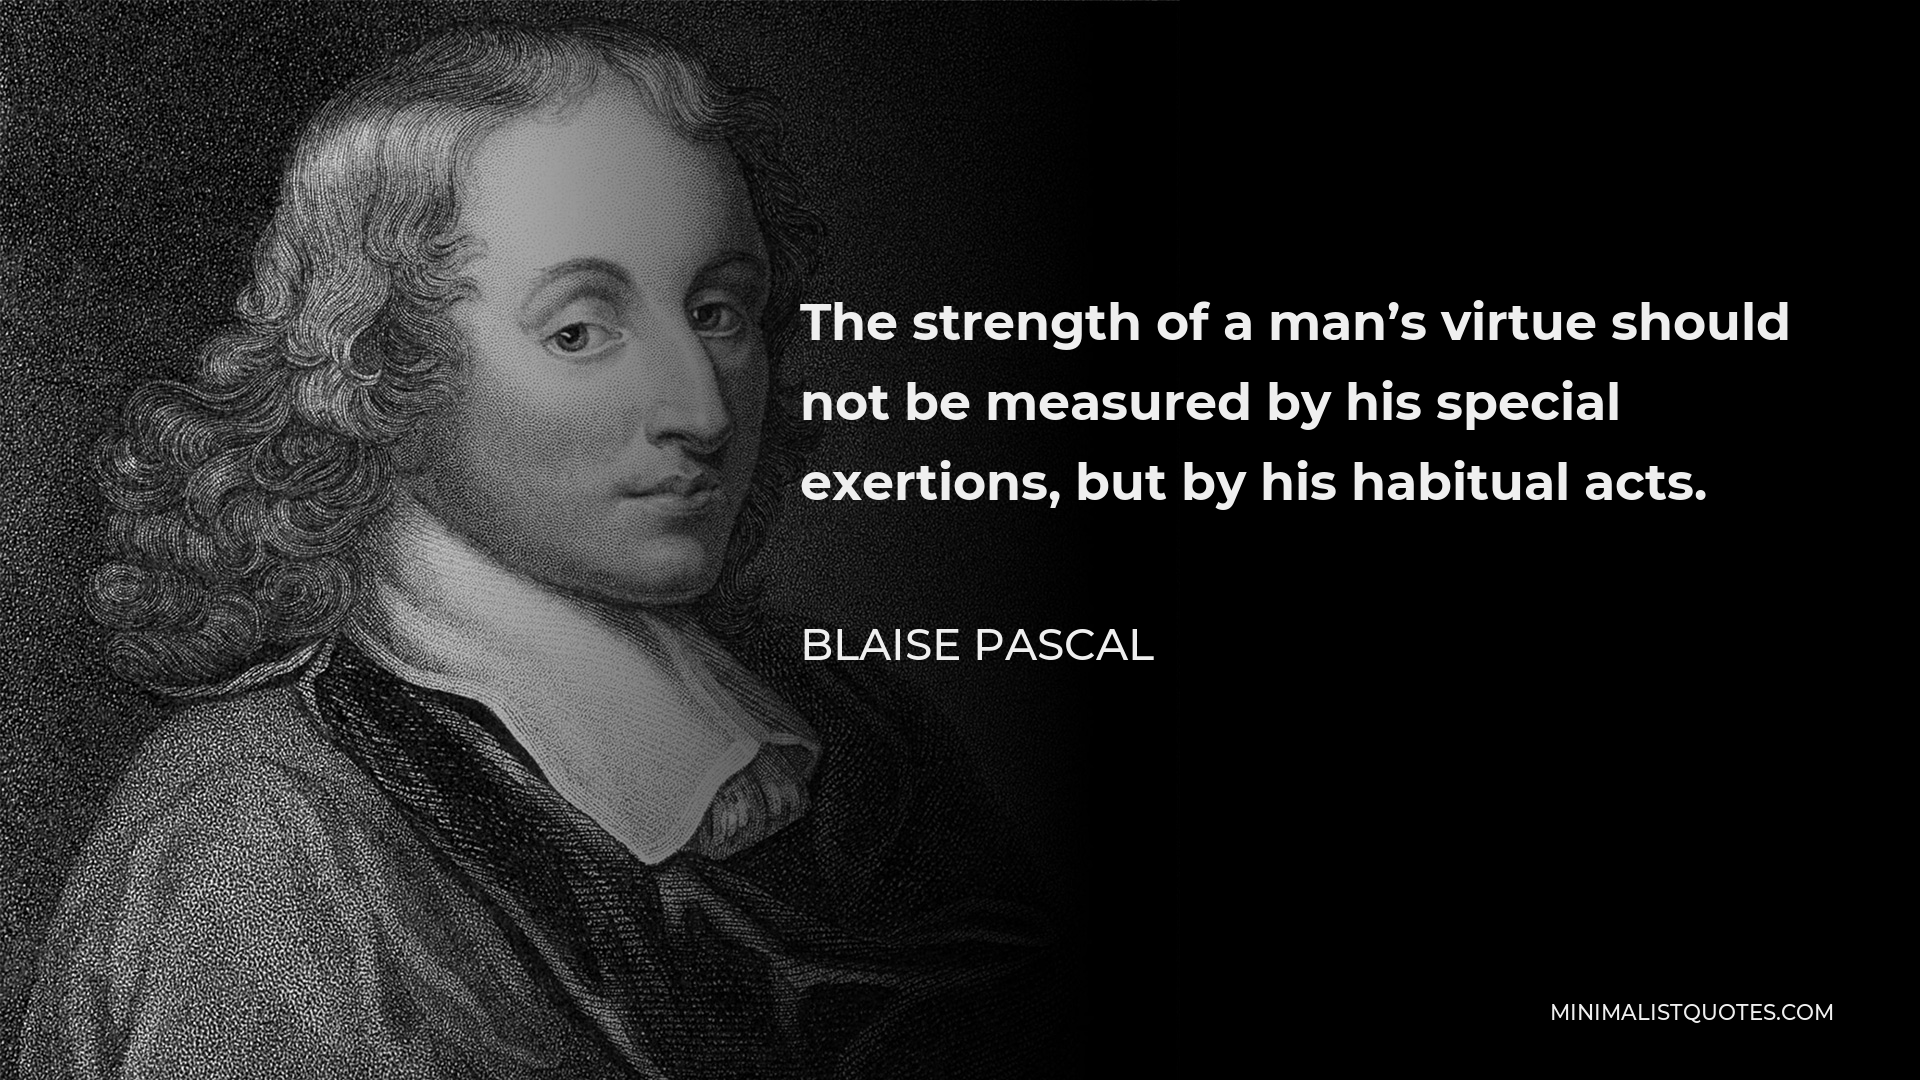 Blaise Pascal Quote - The strength of a man’s virtue should not be measured by his special exertions, but by his habitual acts.